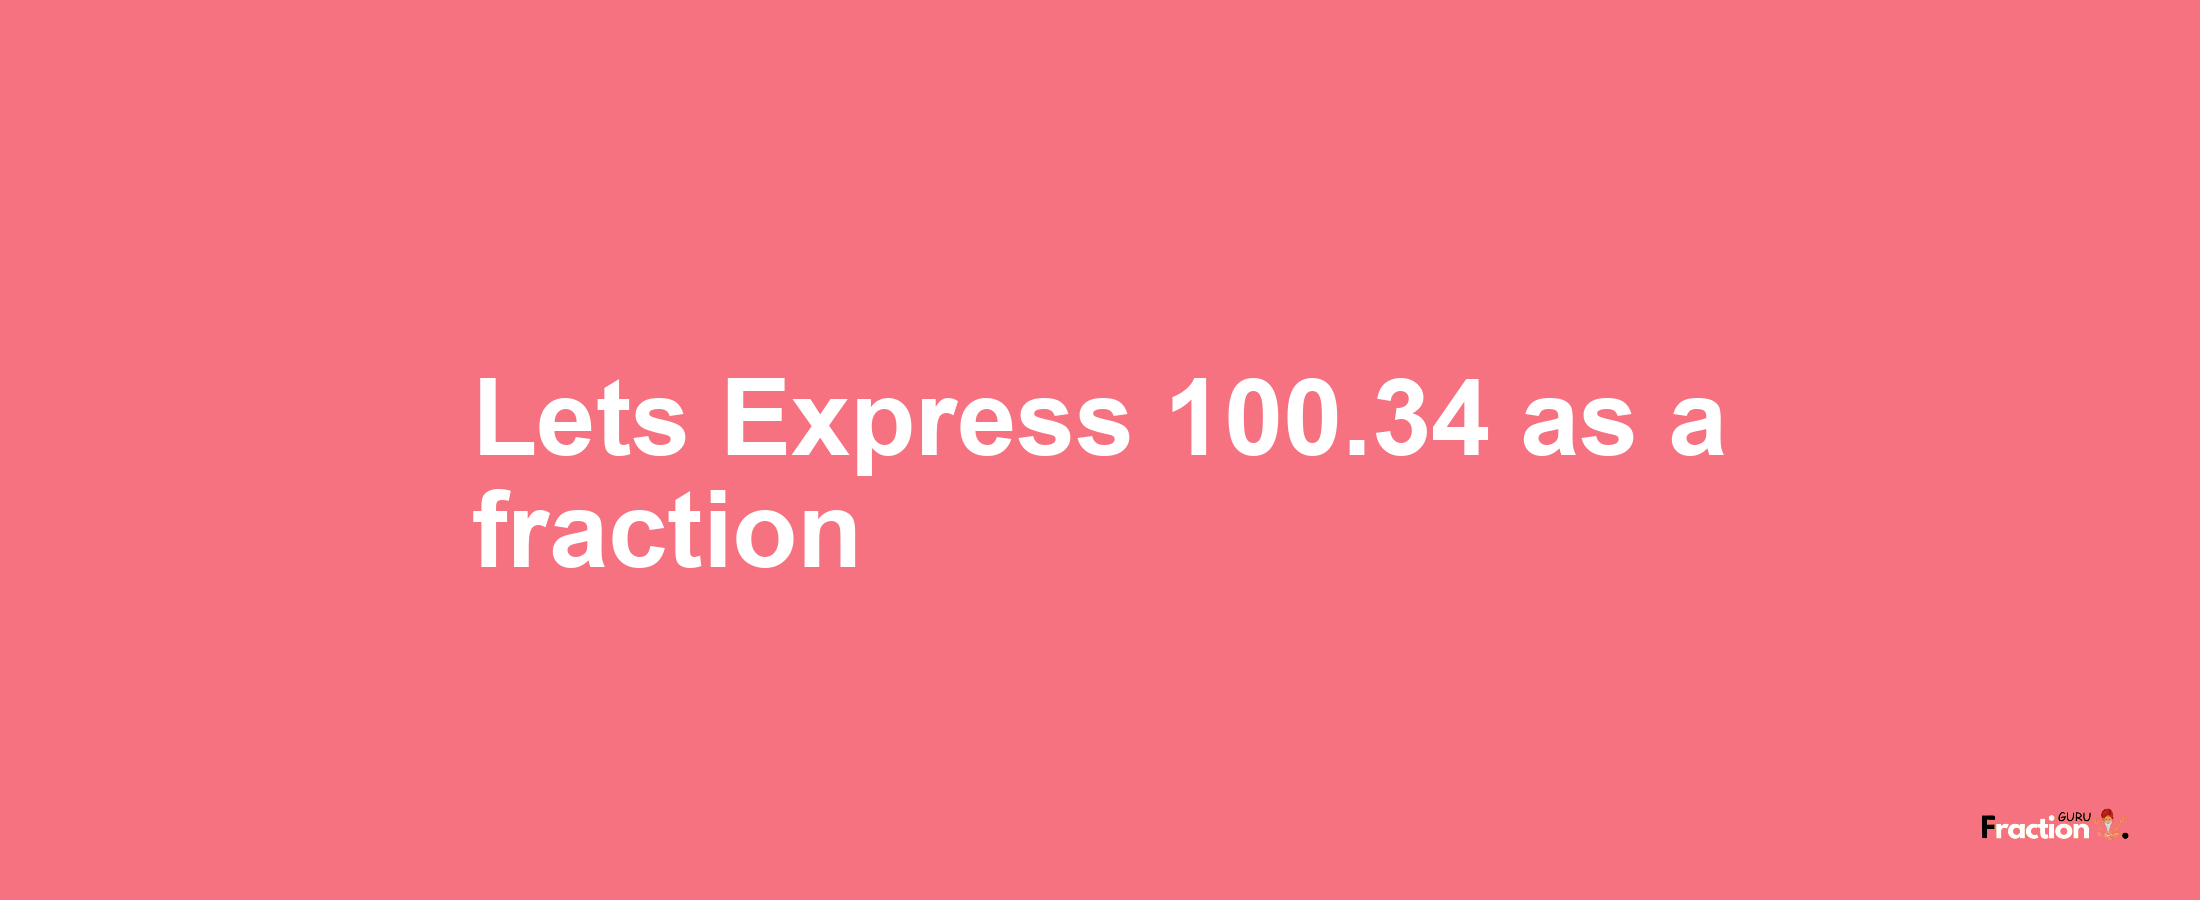 Lets Express 100.34 as afraction